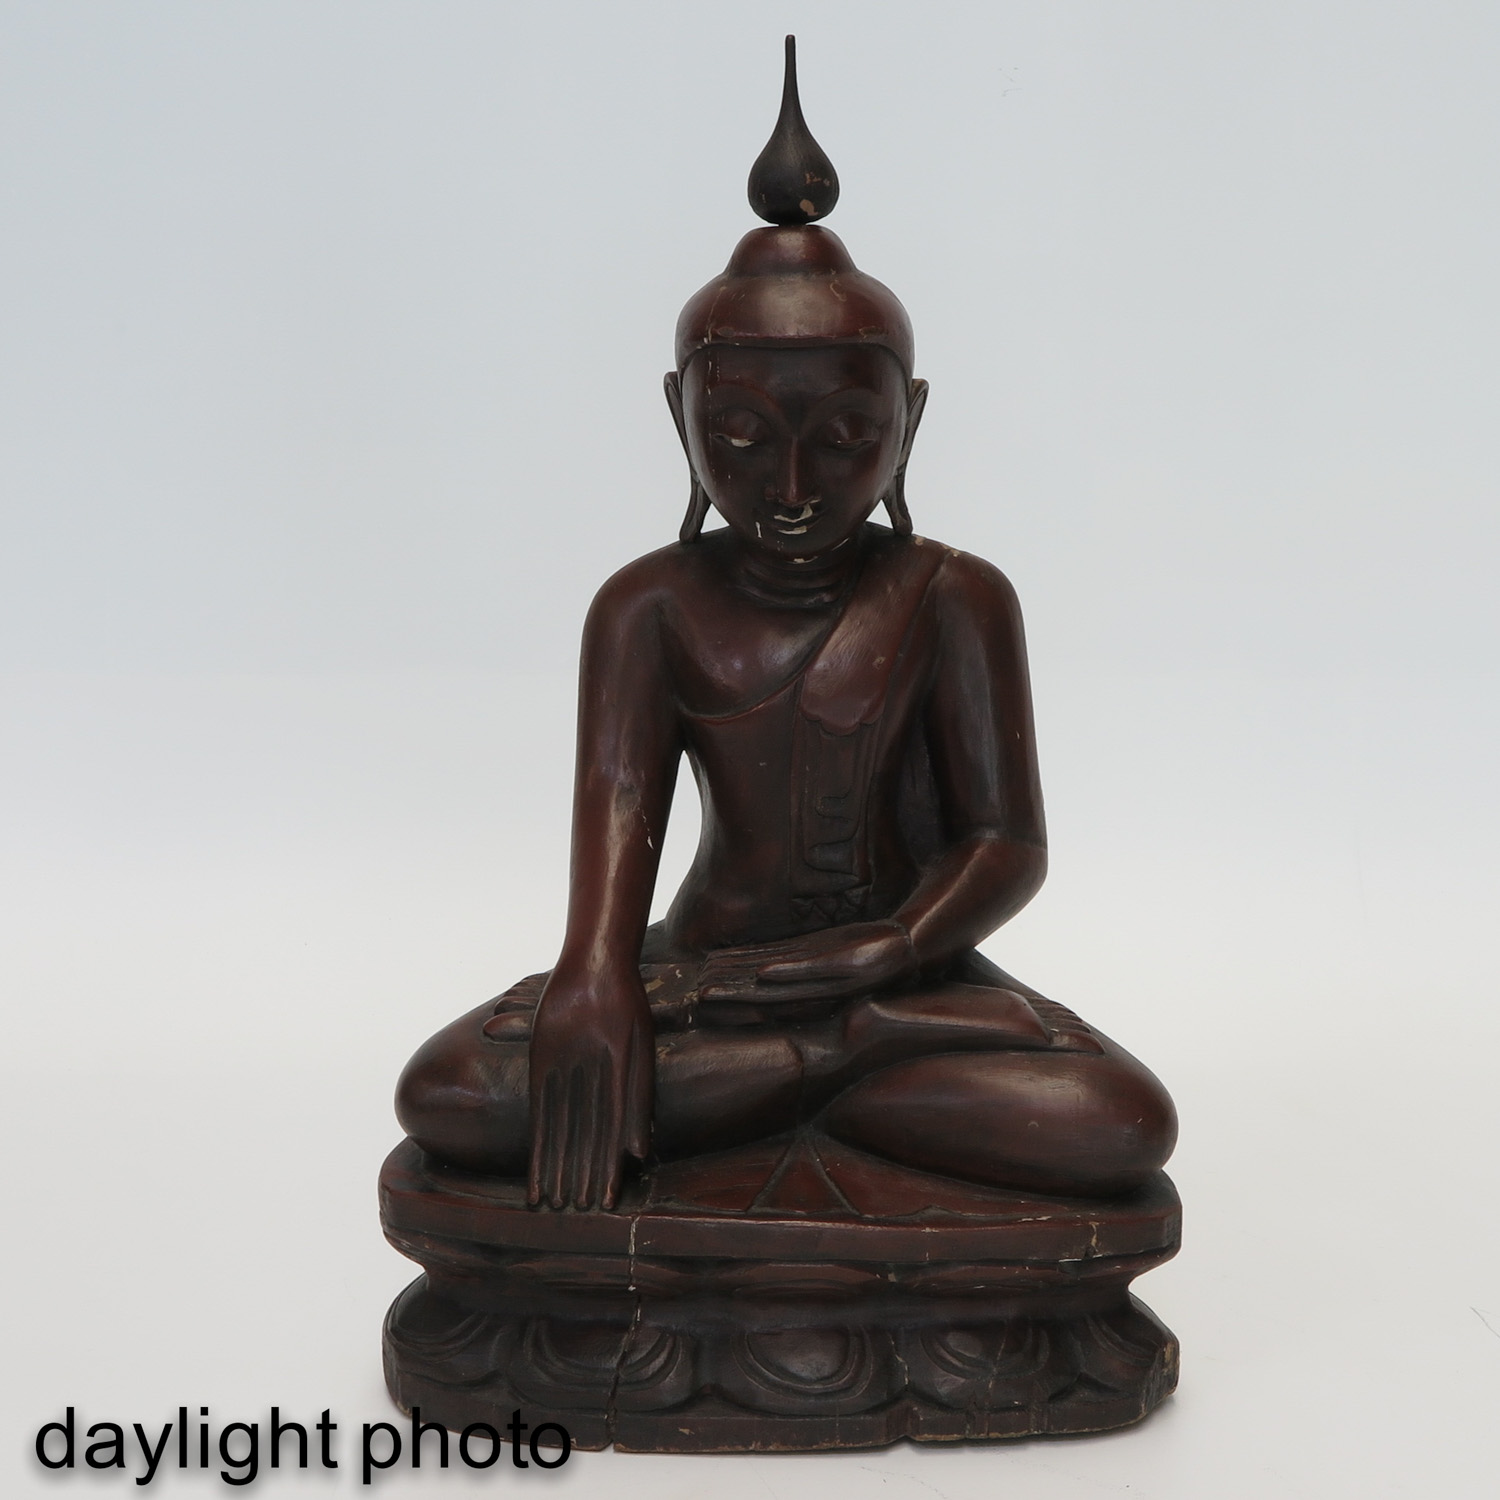 A Carved Wood Buddha Sculpture - Image 7 of 10